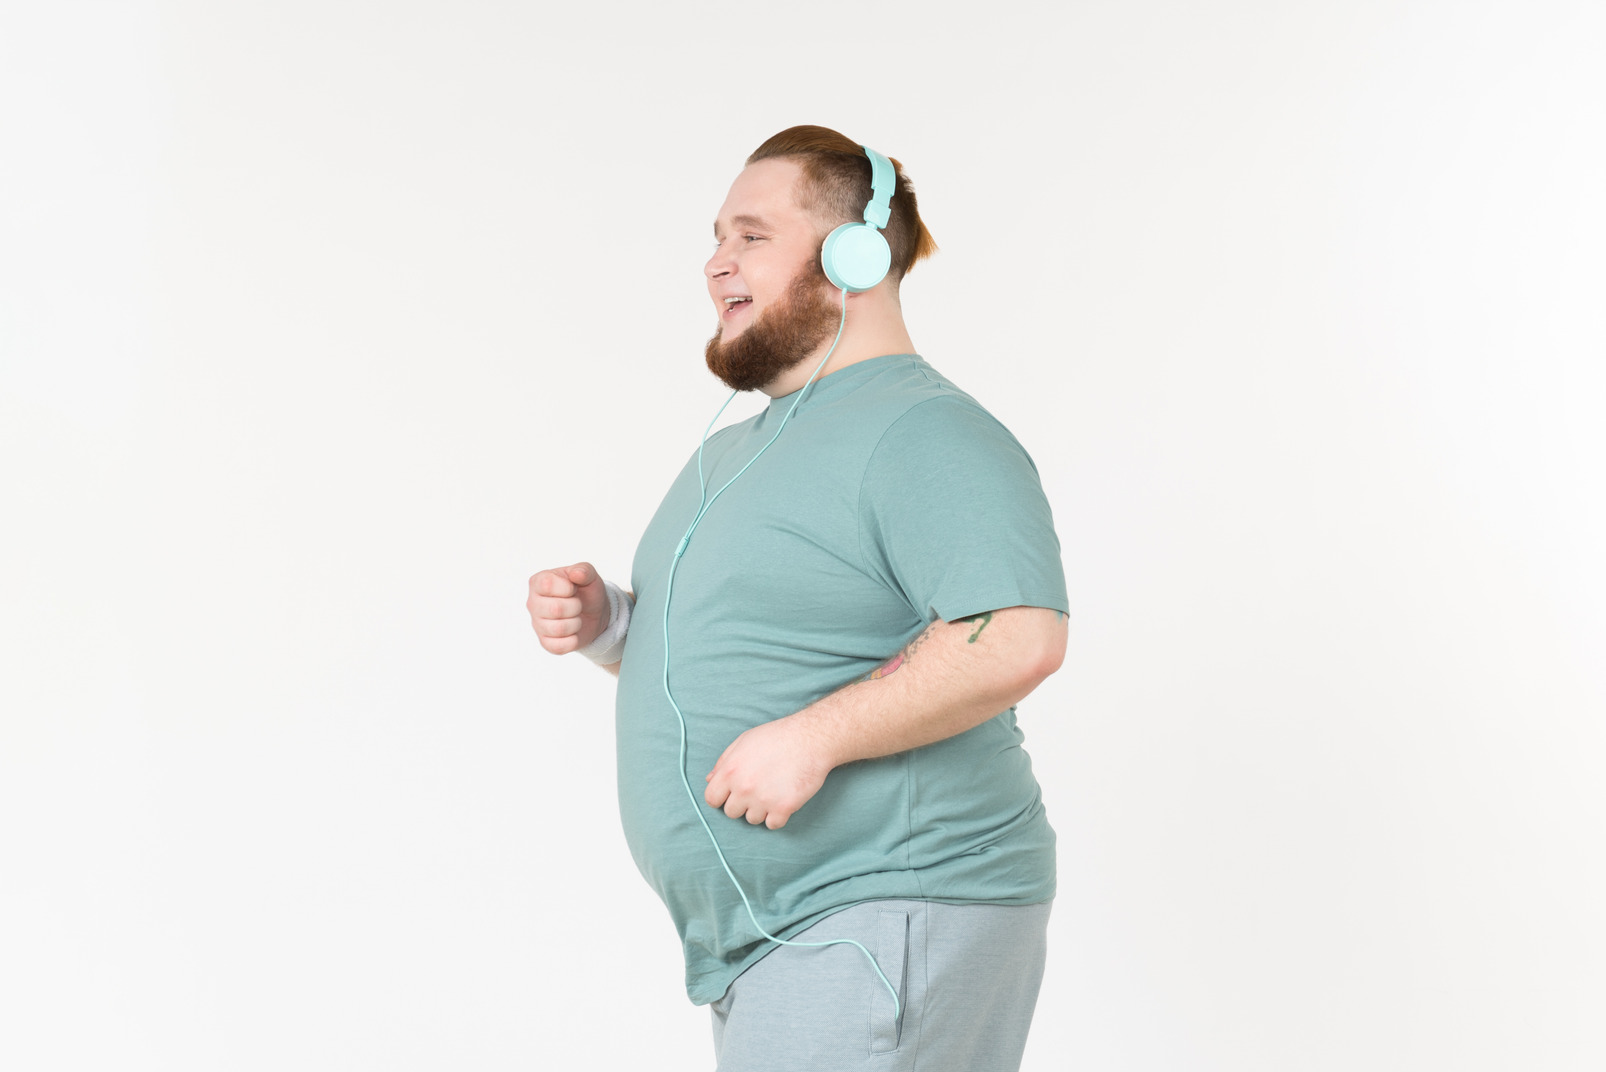 Young overweight man jogging and wearing headphones